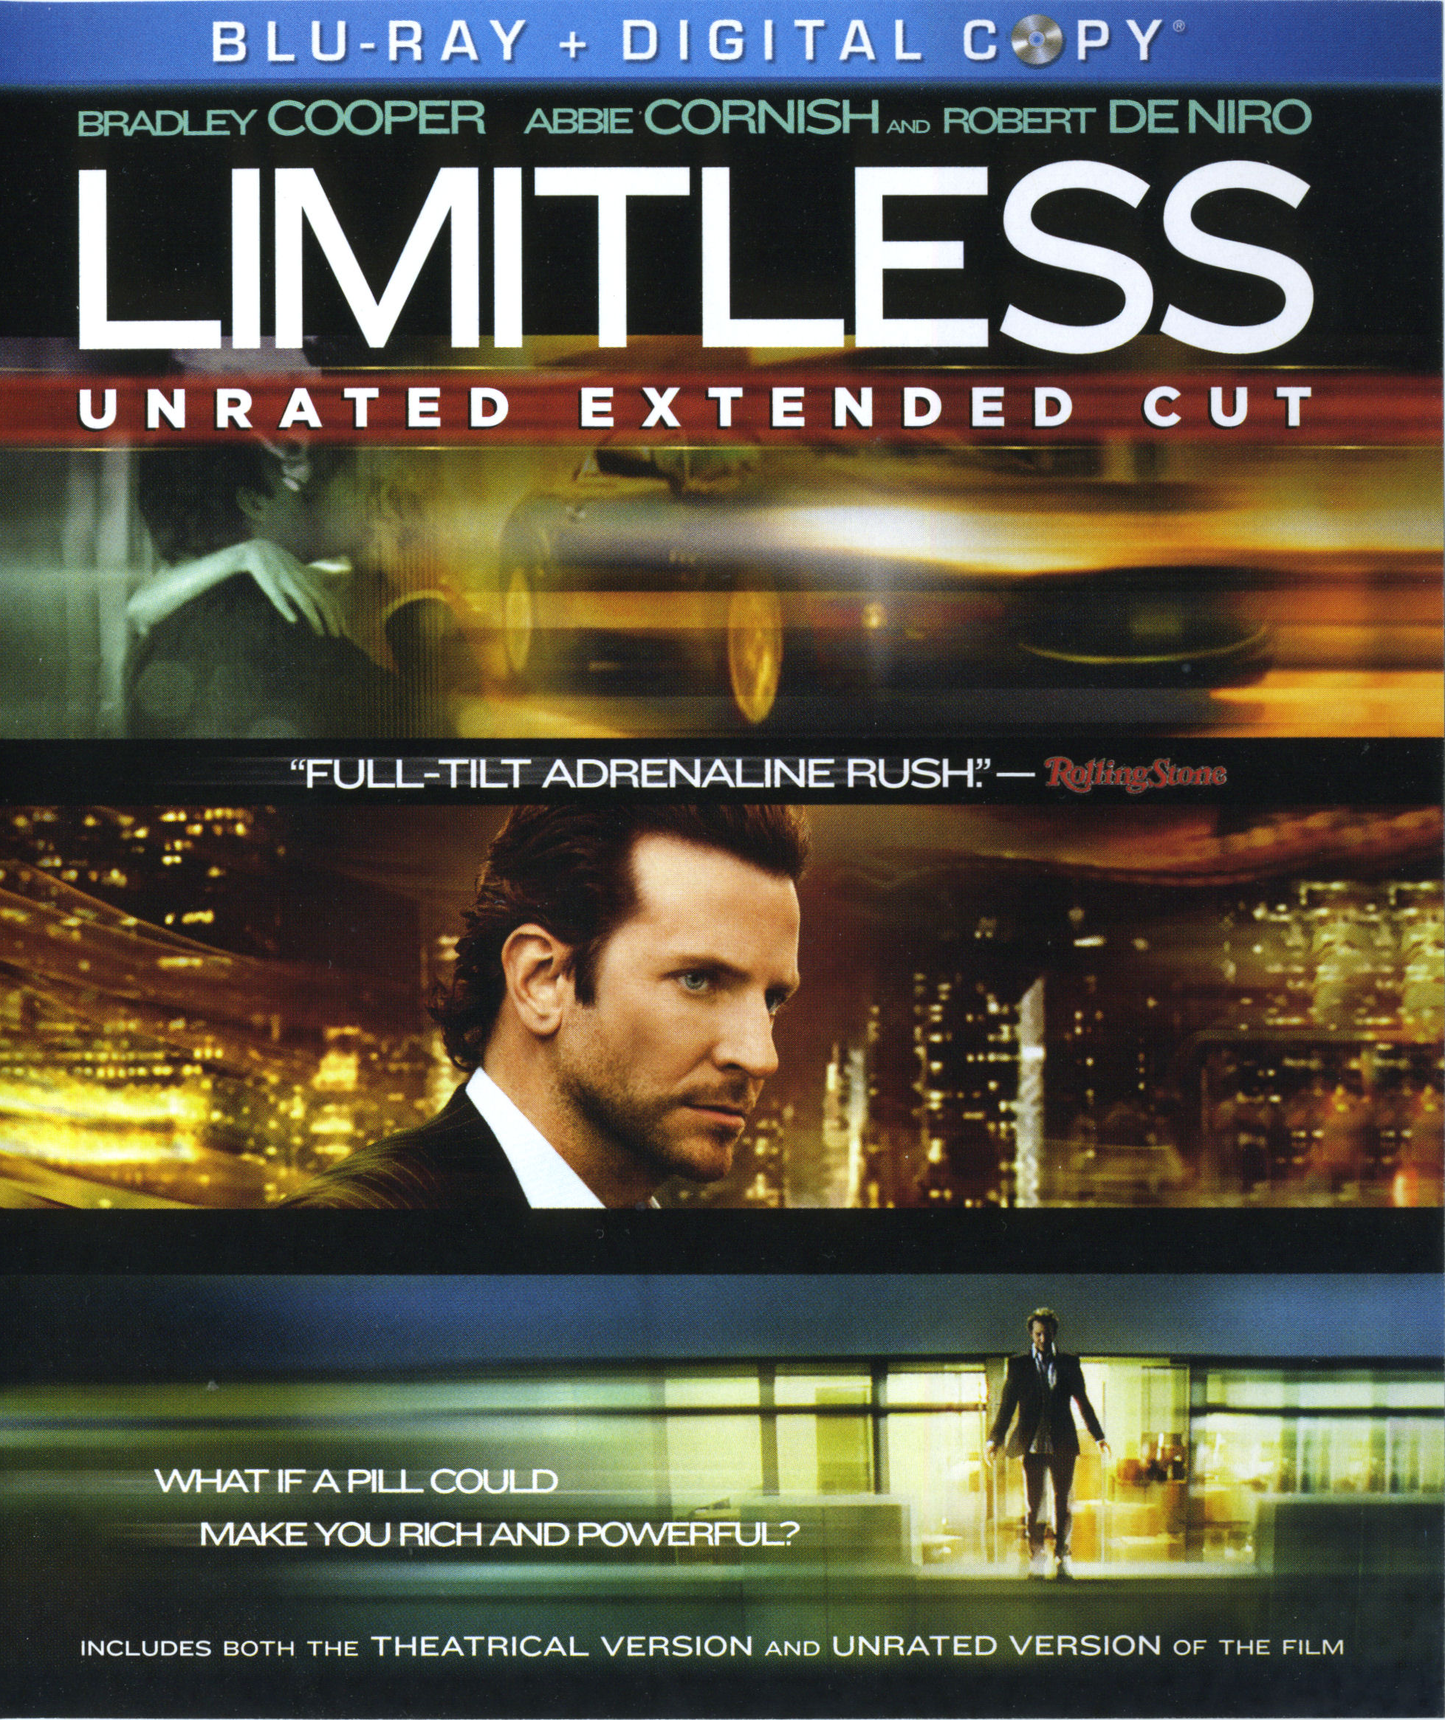 Limitless - Blu-ray Action/Adventure 2011 UR